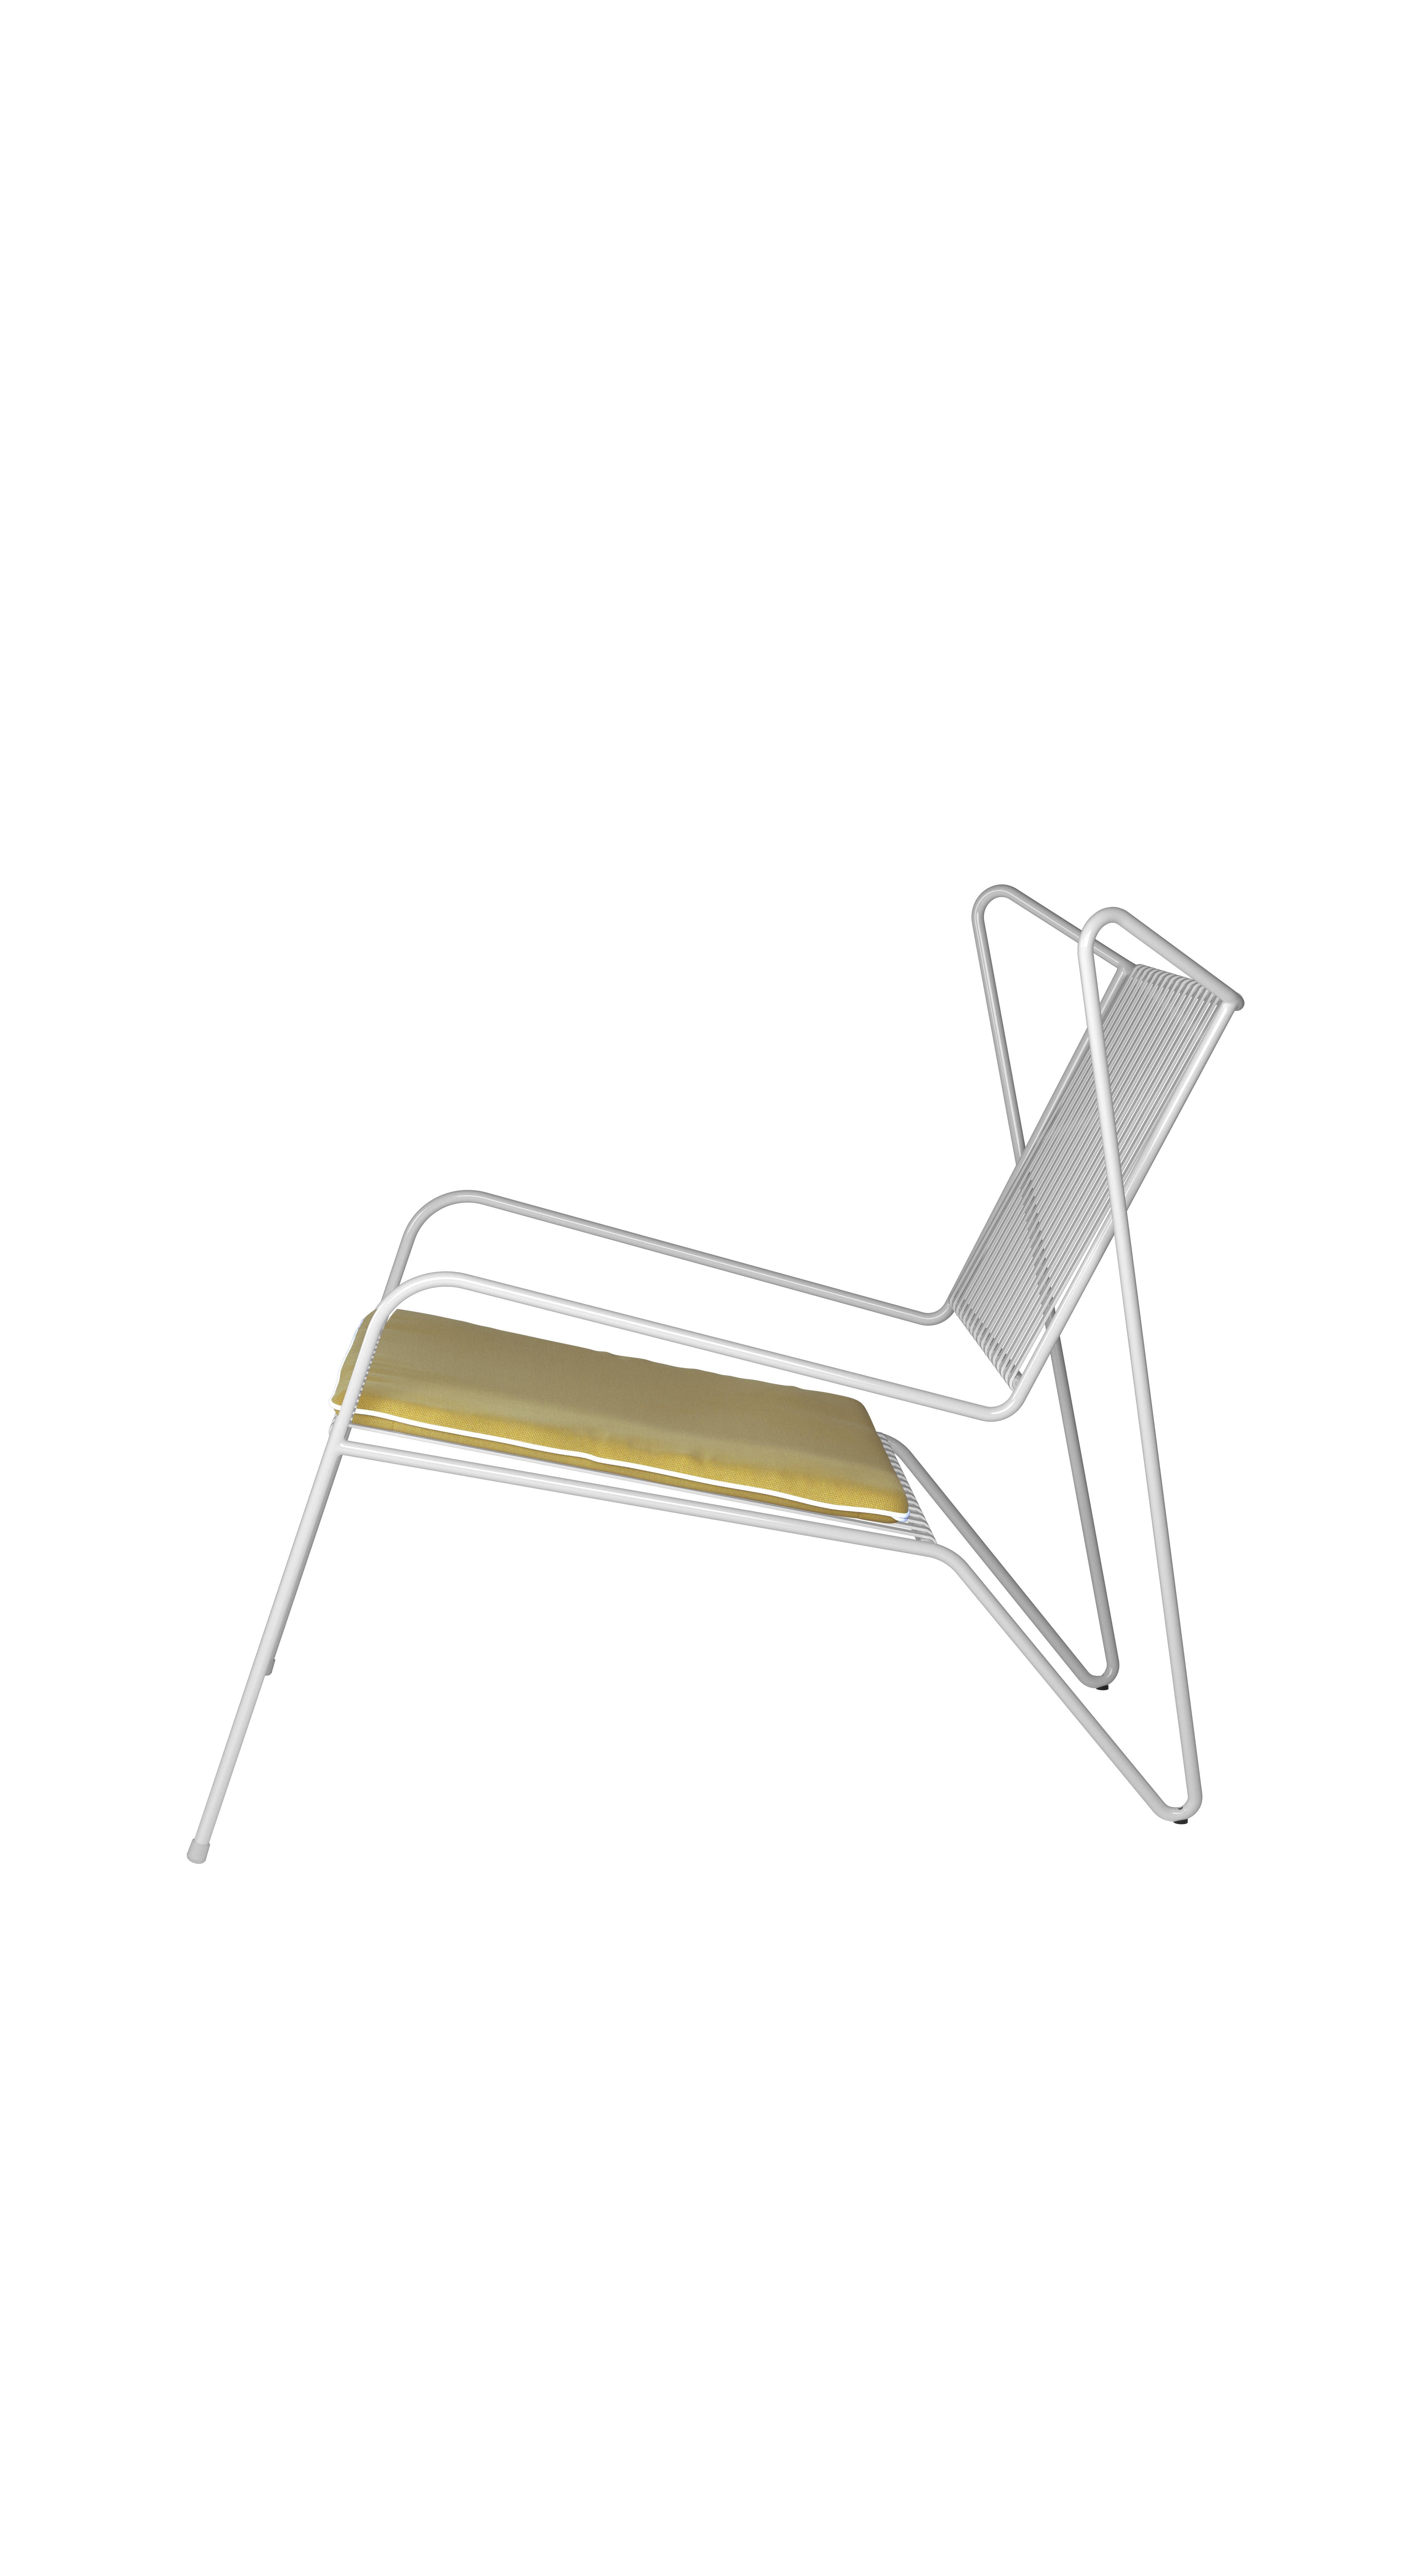 White Capri easy lounge chair with seat cushion by Cools Collection
Materials: Powder coated stainless steel, fabric suitable for outdoor use.
Dimensions: Lounge Chair: W 70 x D 84 x H 78 cm (seat height 35cm).
Seat cushion: W 52 x D 54 x H